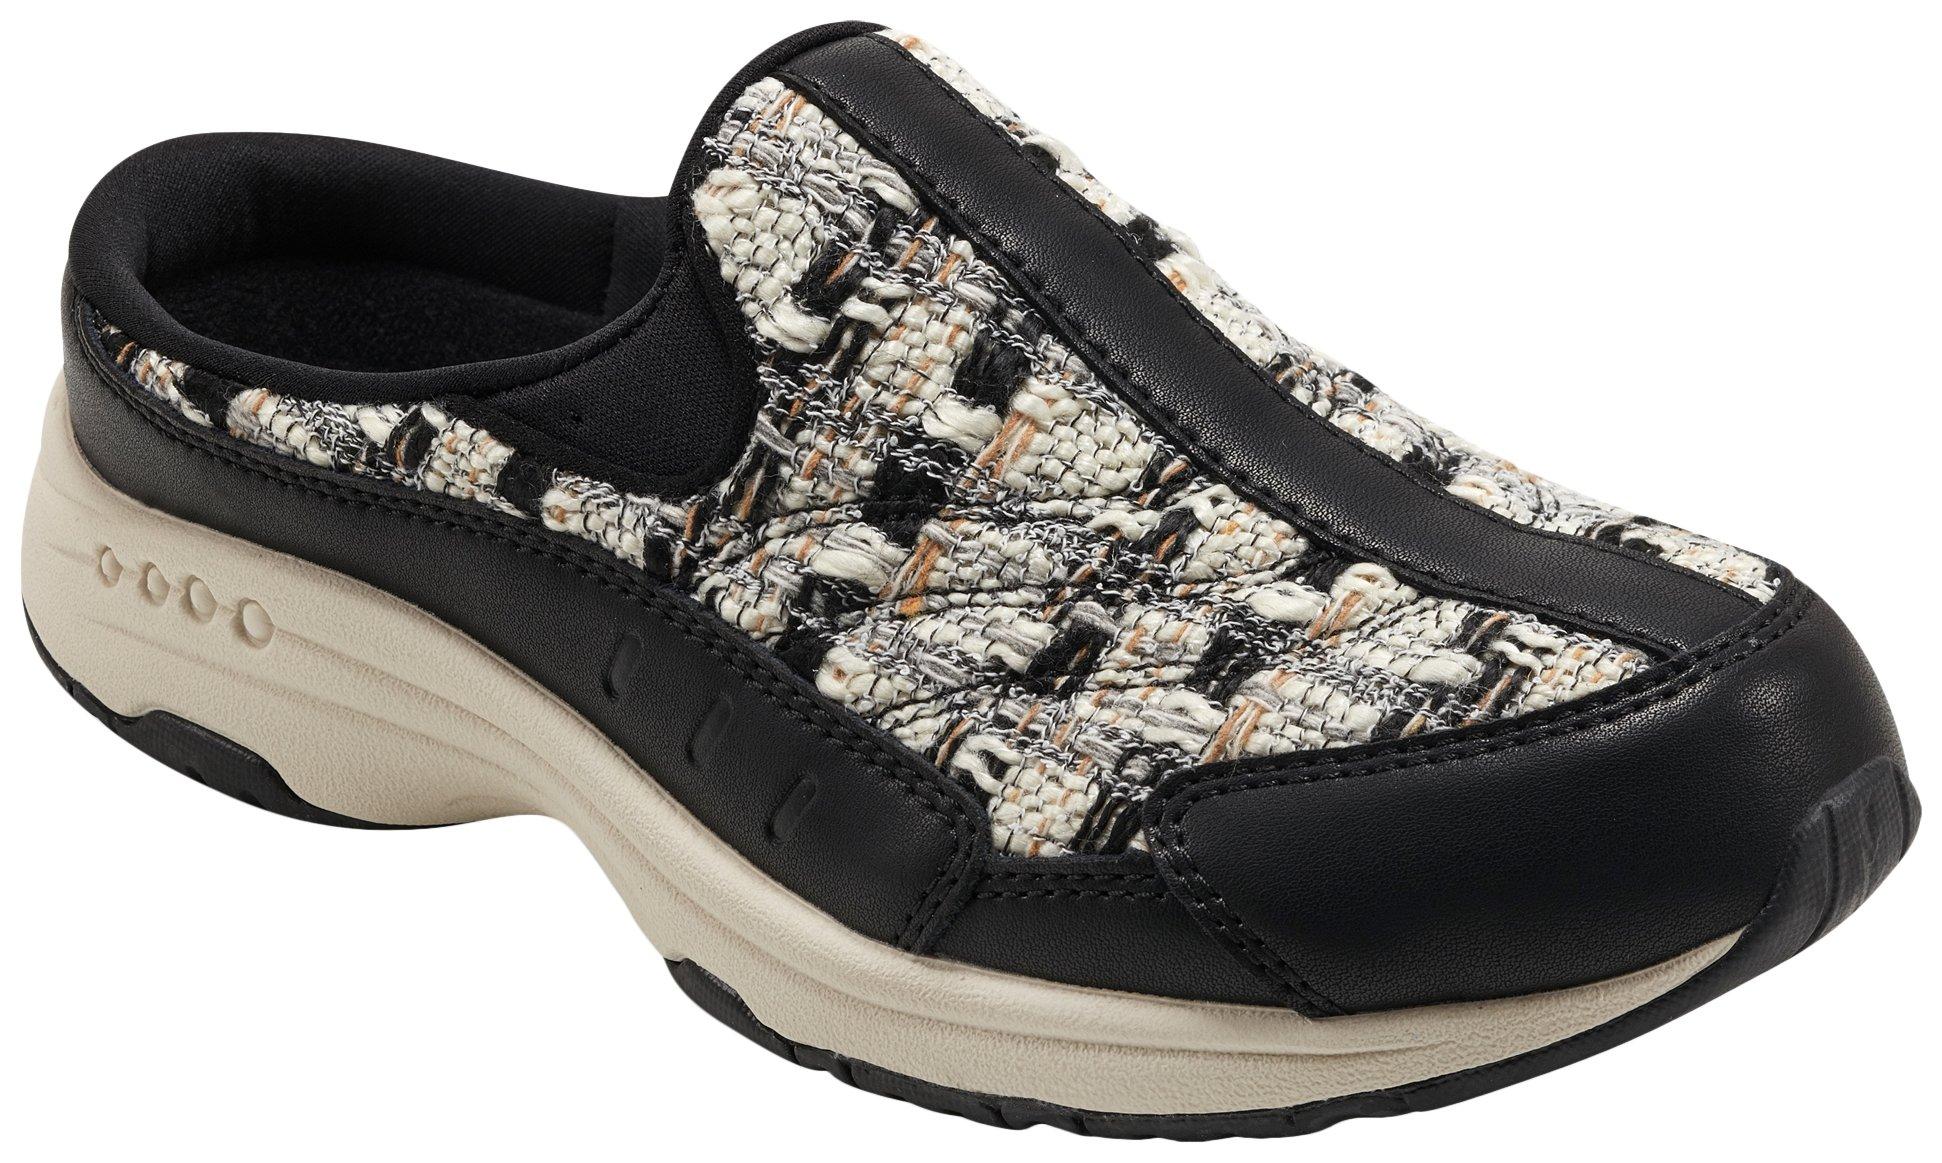 Womens Traveltime 697 Athletic Mules